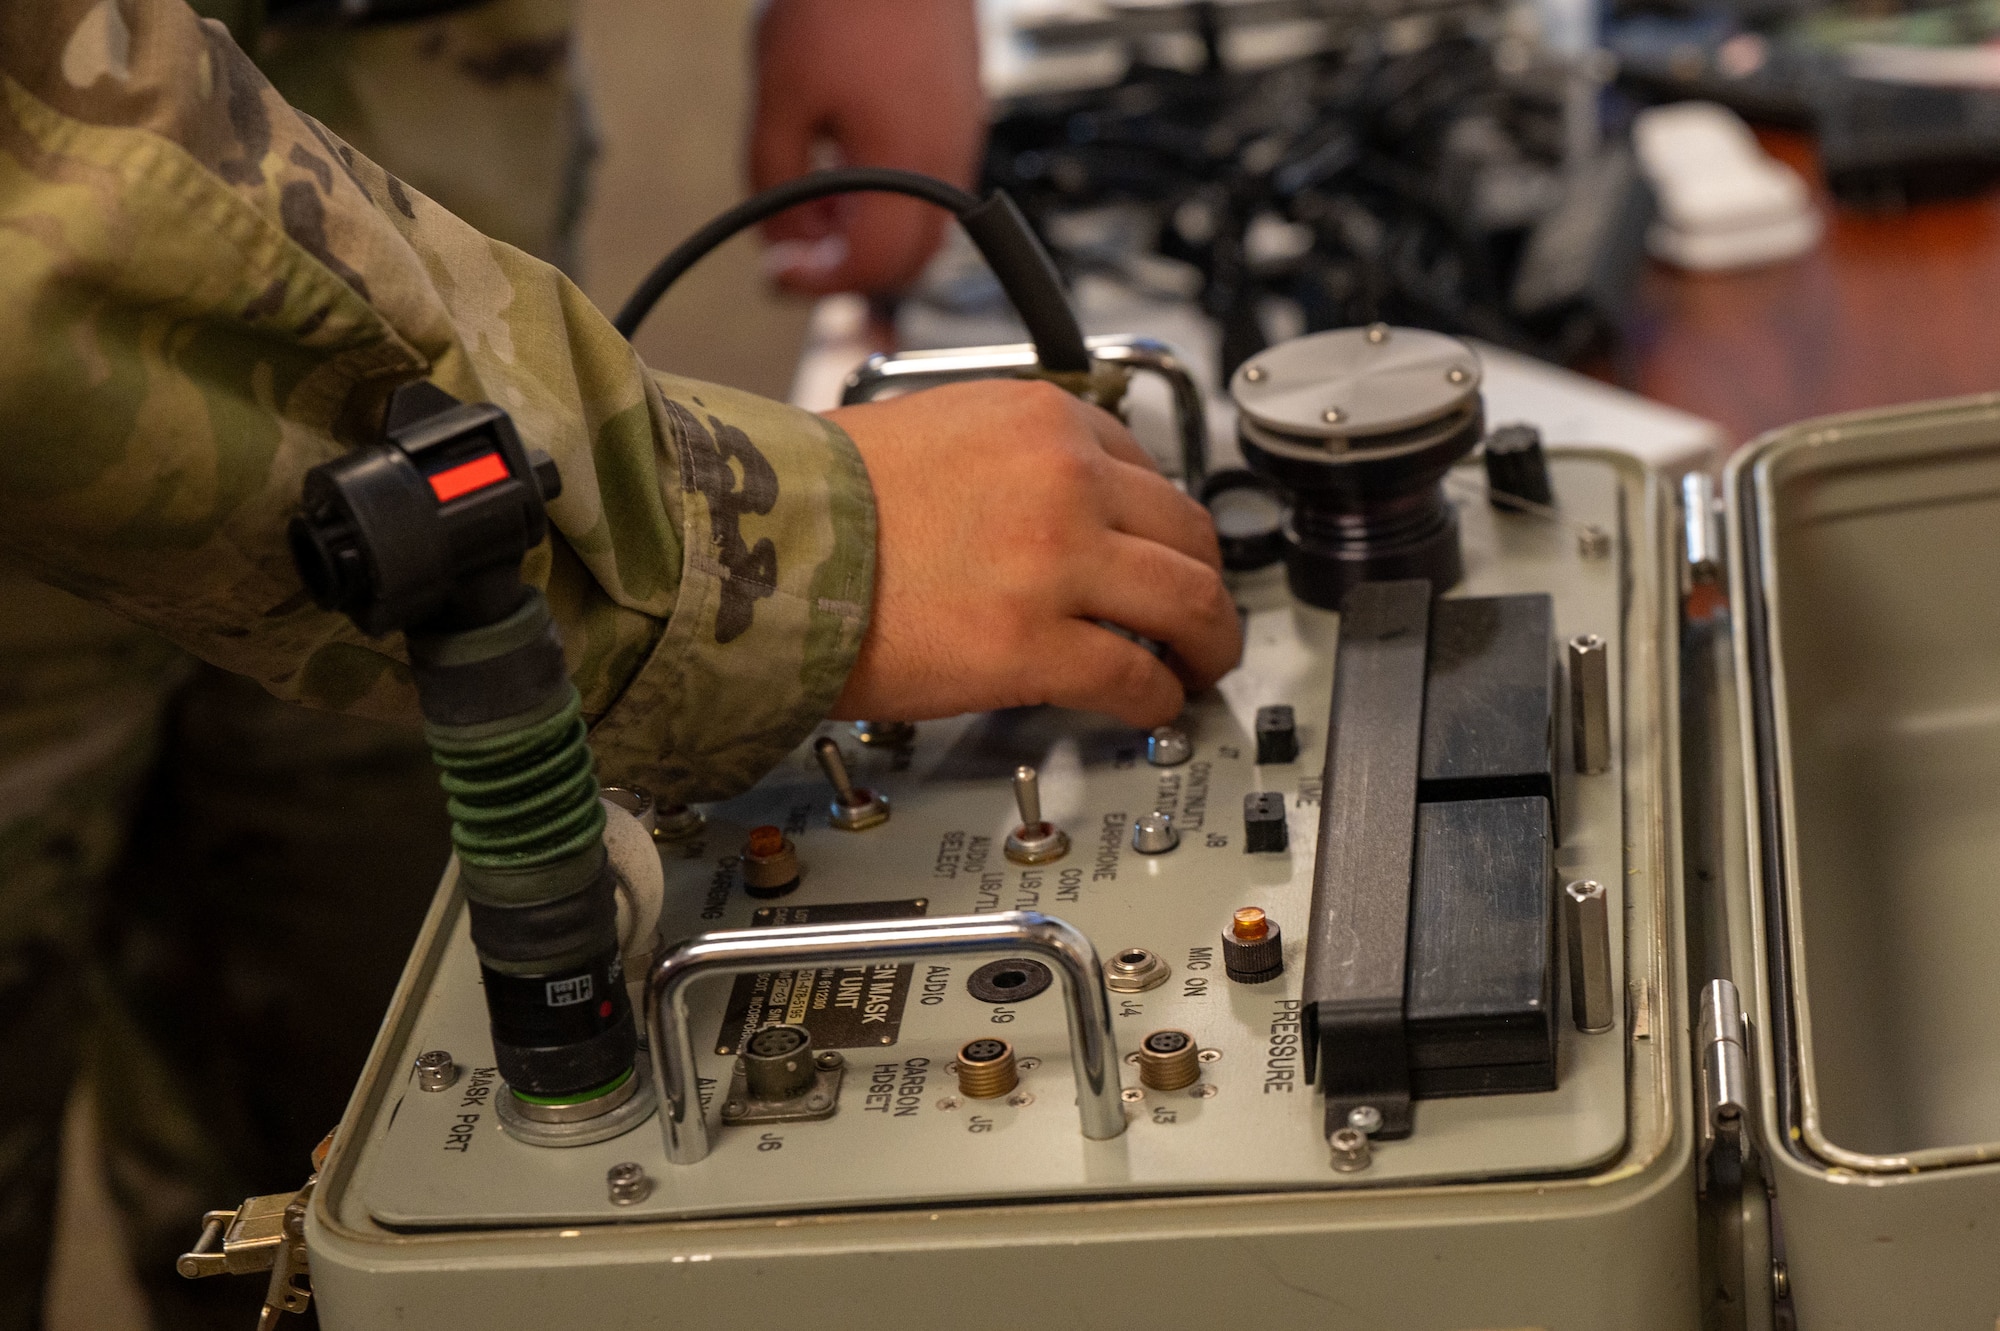 U.S. Air Force Airman 1st Class Melodee Arevalo, 755th Operations Support Squadron aircrew flight equipment specialist, uses a system communication and oxygen tester at Davis-Monthan Air Force Base, Ariz., March 5, 2024. The SCOT was designed to test the efficiency of life support equipment, such as the M69 mask. (U.S. Air Force photo by Airman 1st Class Robert Allen Cooke III)